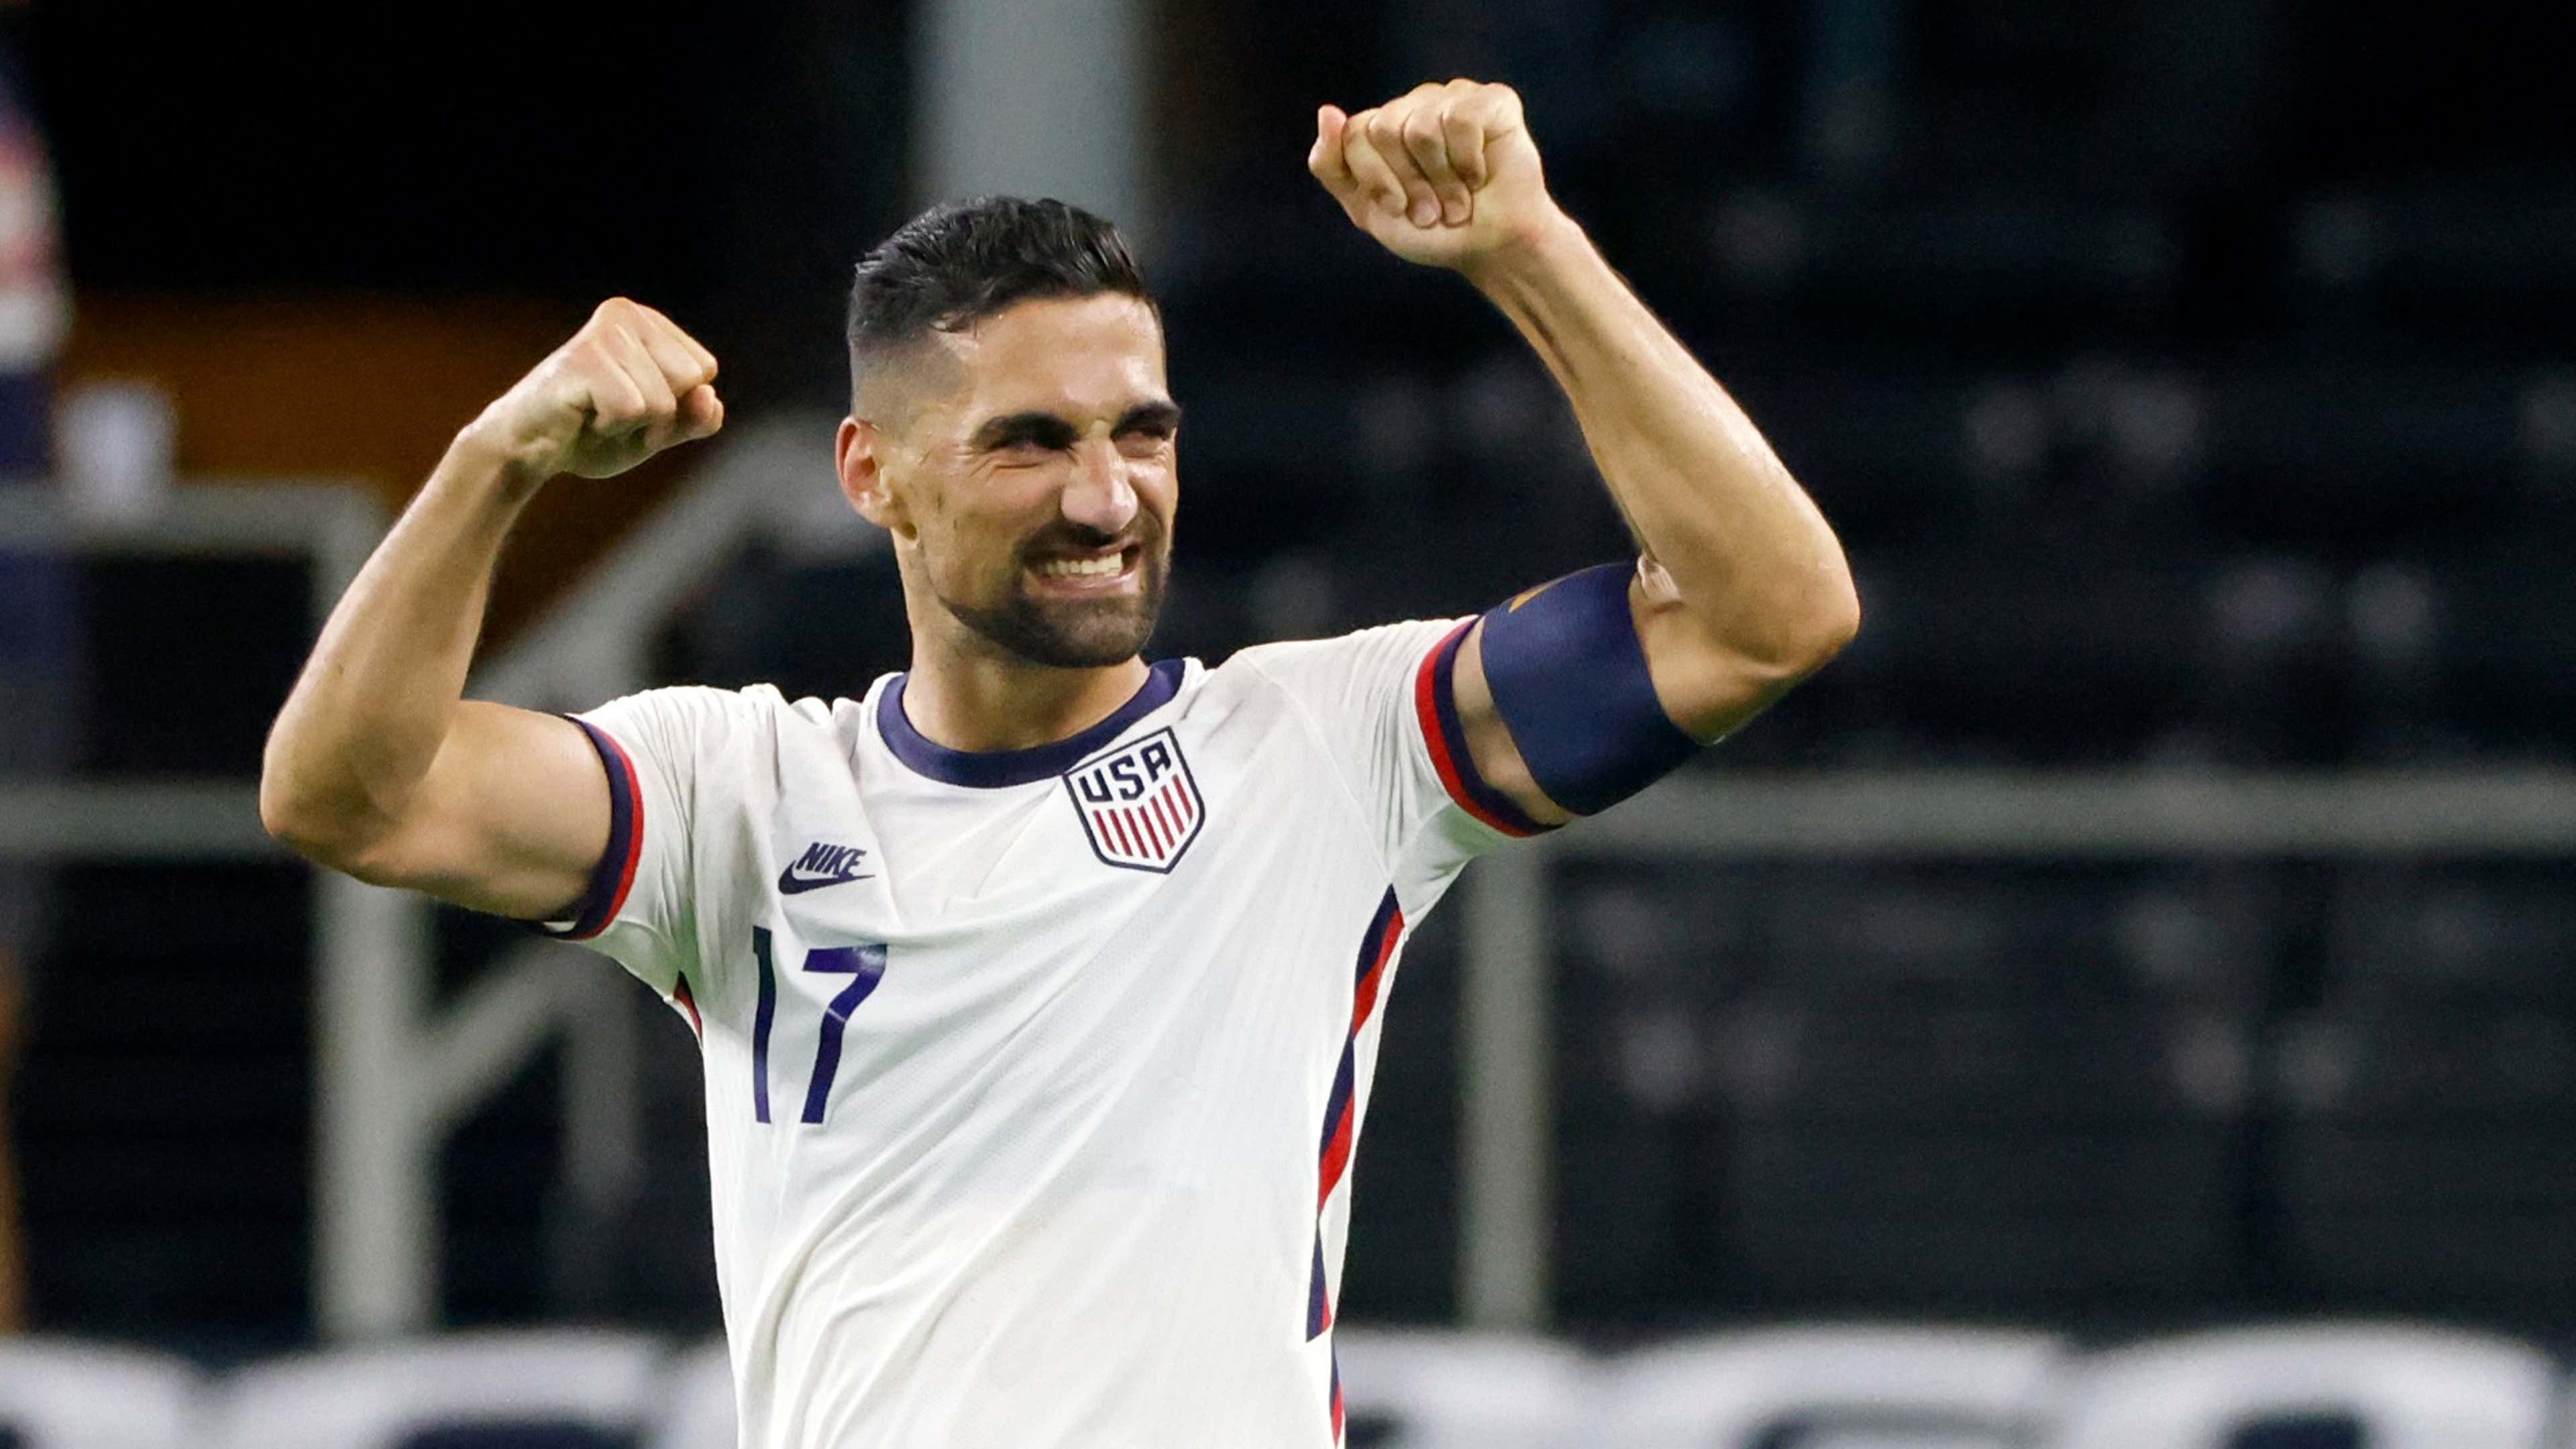 Top 5 best American soccer players in the world right now